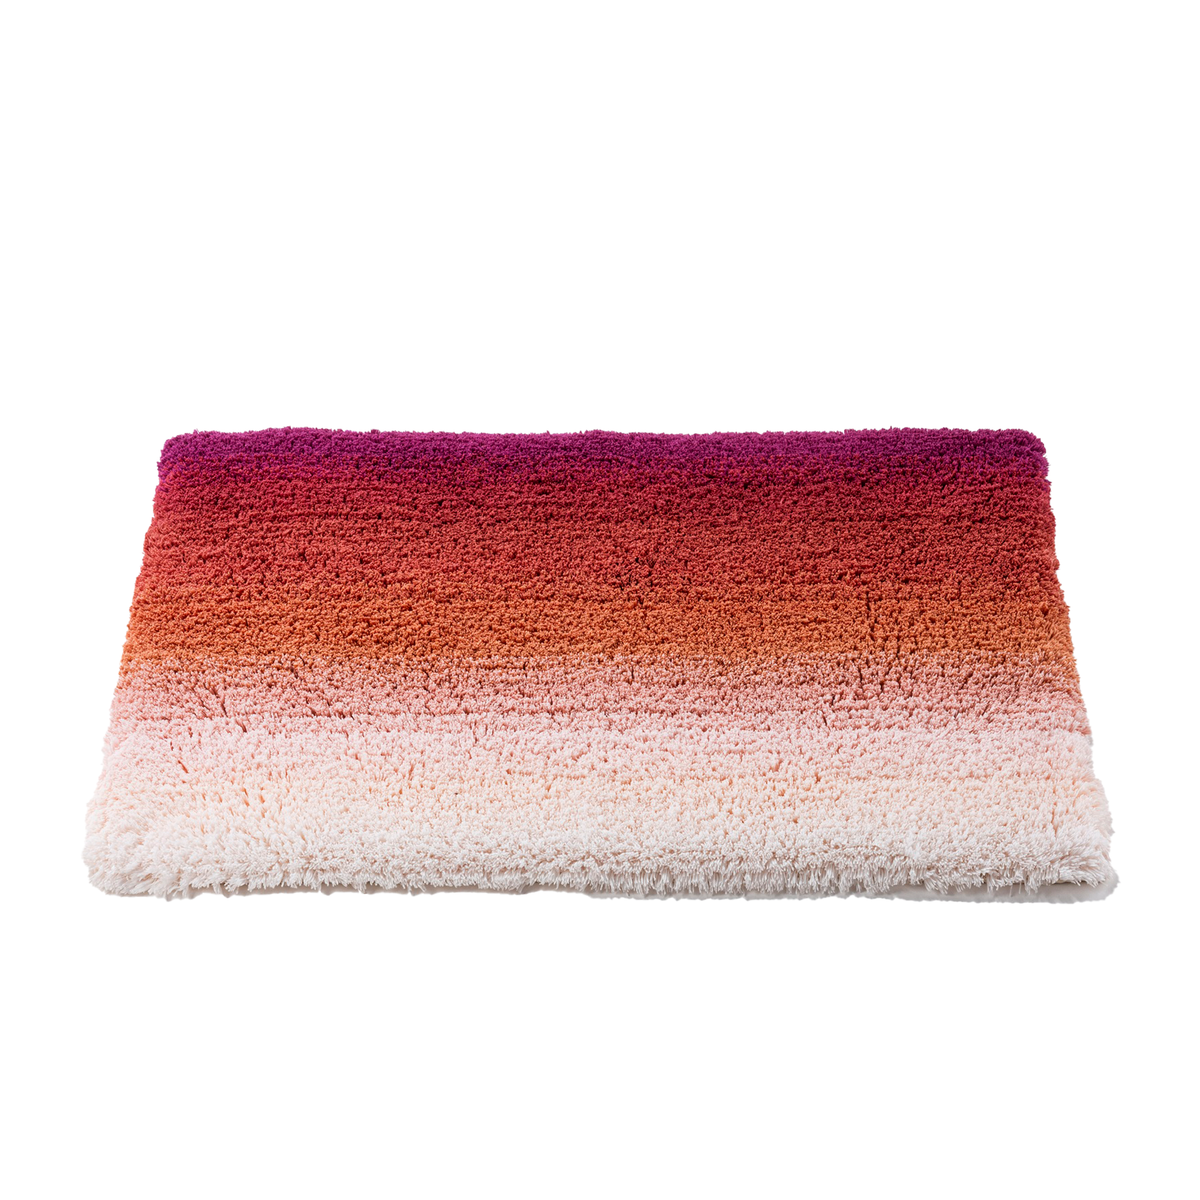 Straight Image of Abyss Habidecor Aurore Bath Rugs in Color Baton Rogue (514)